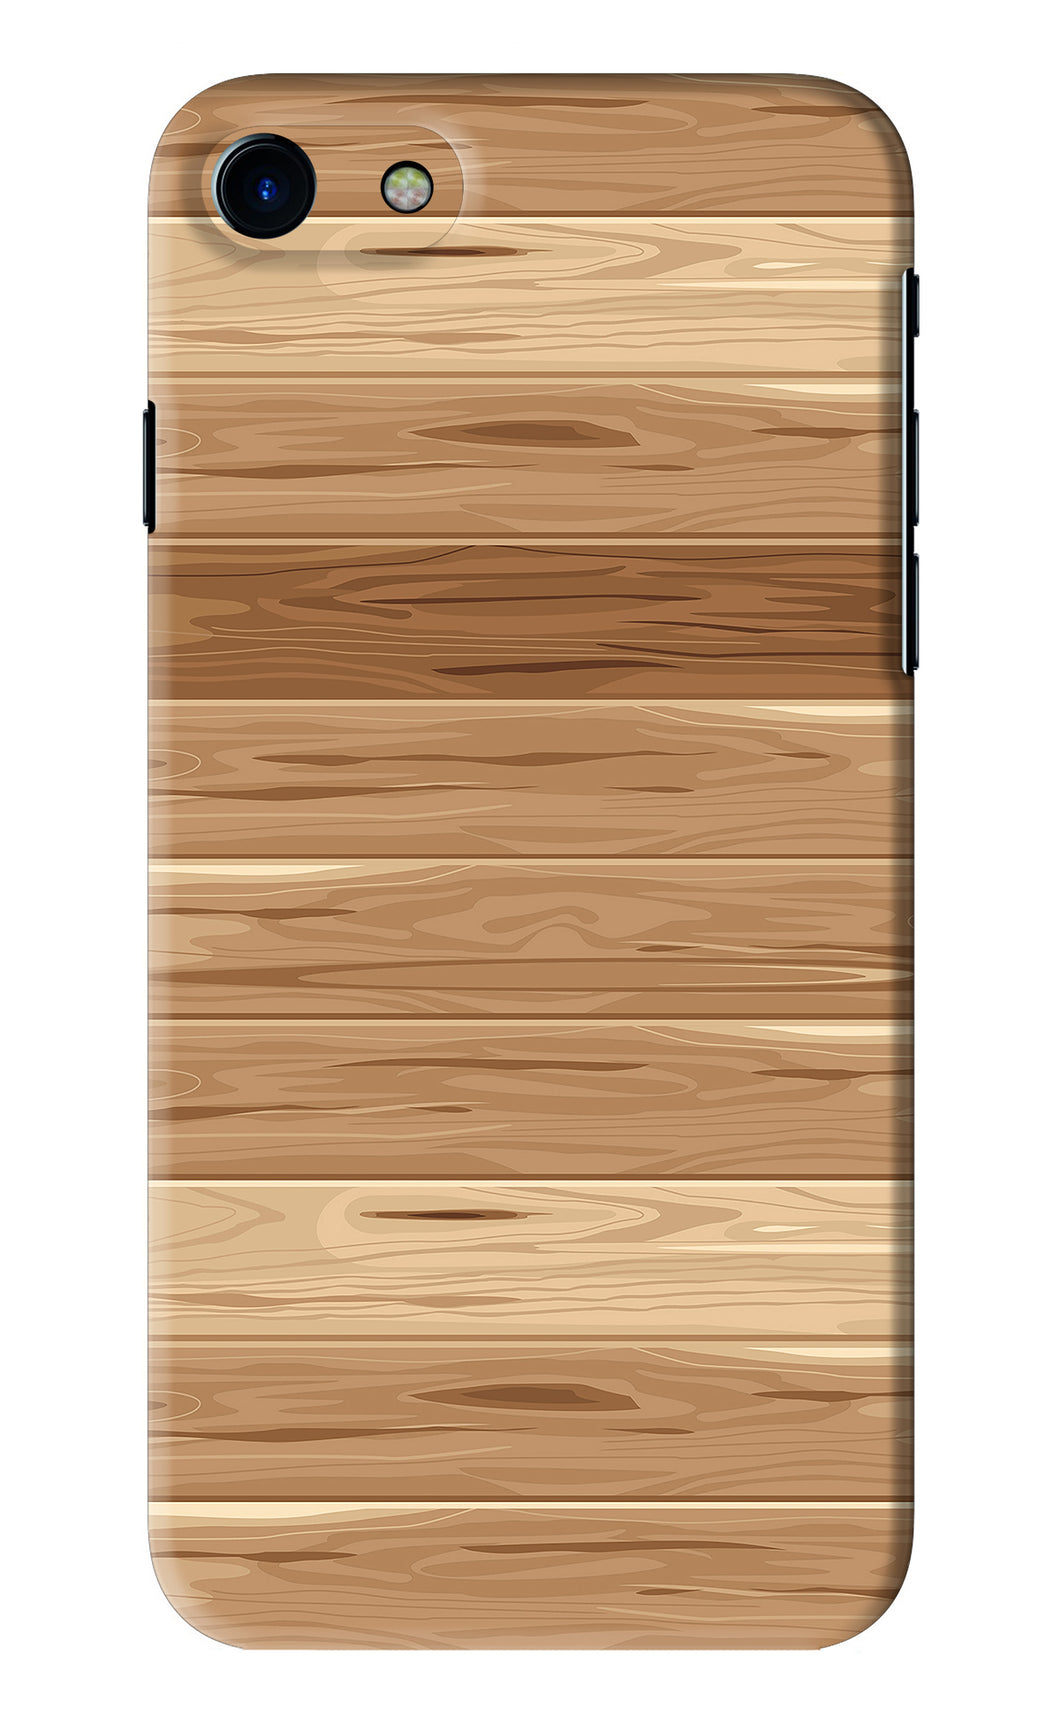 Wooden Vector iPhone 7 Back Skin Wrap